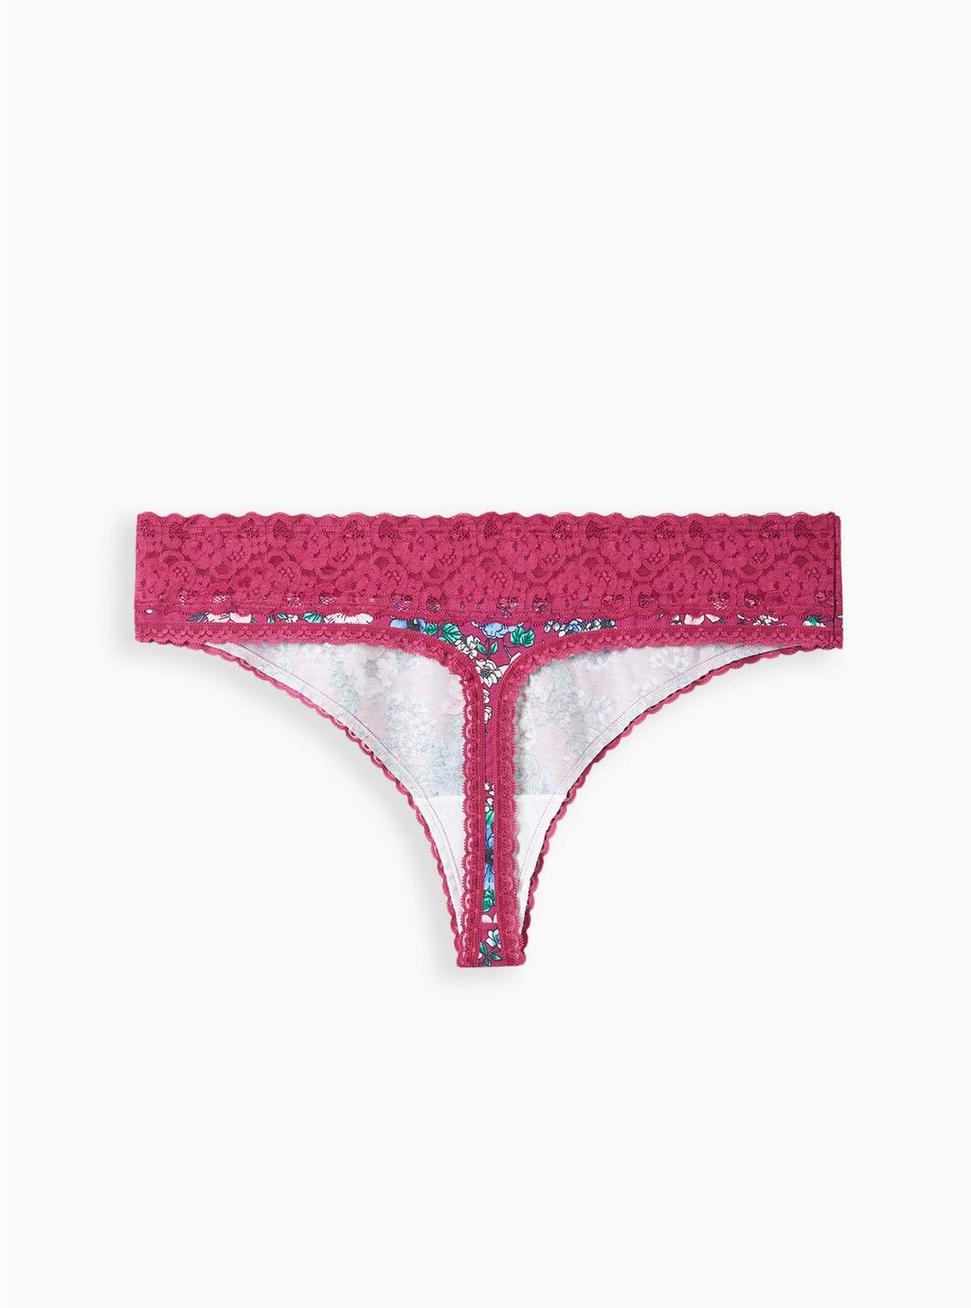 Cotton Mid-Rise Thong Lace Trim Panty, STAND OUT FLORAL PURPLE, alternate